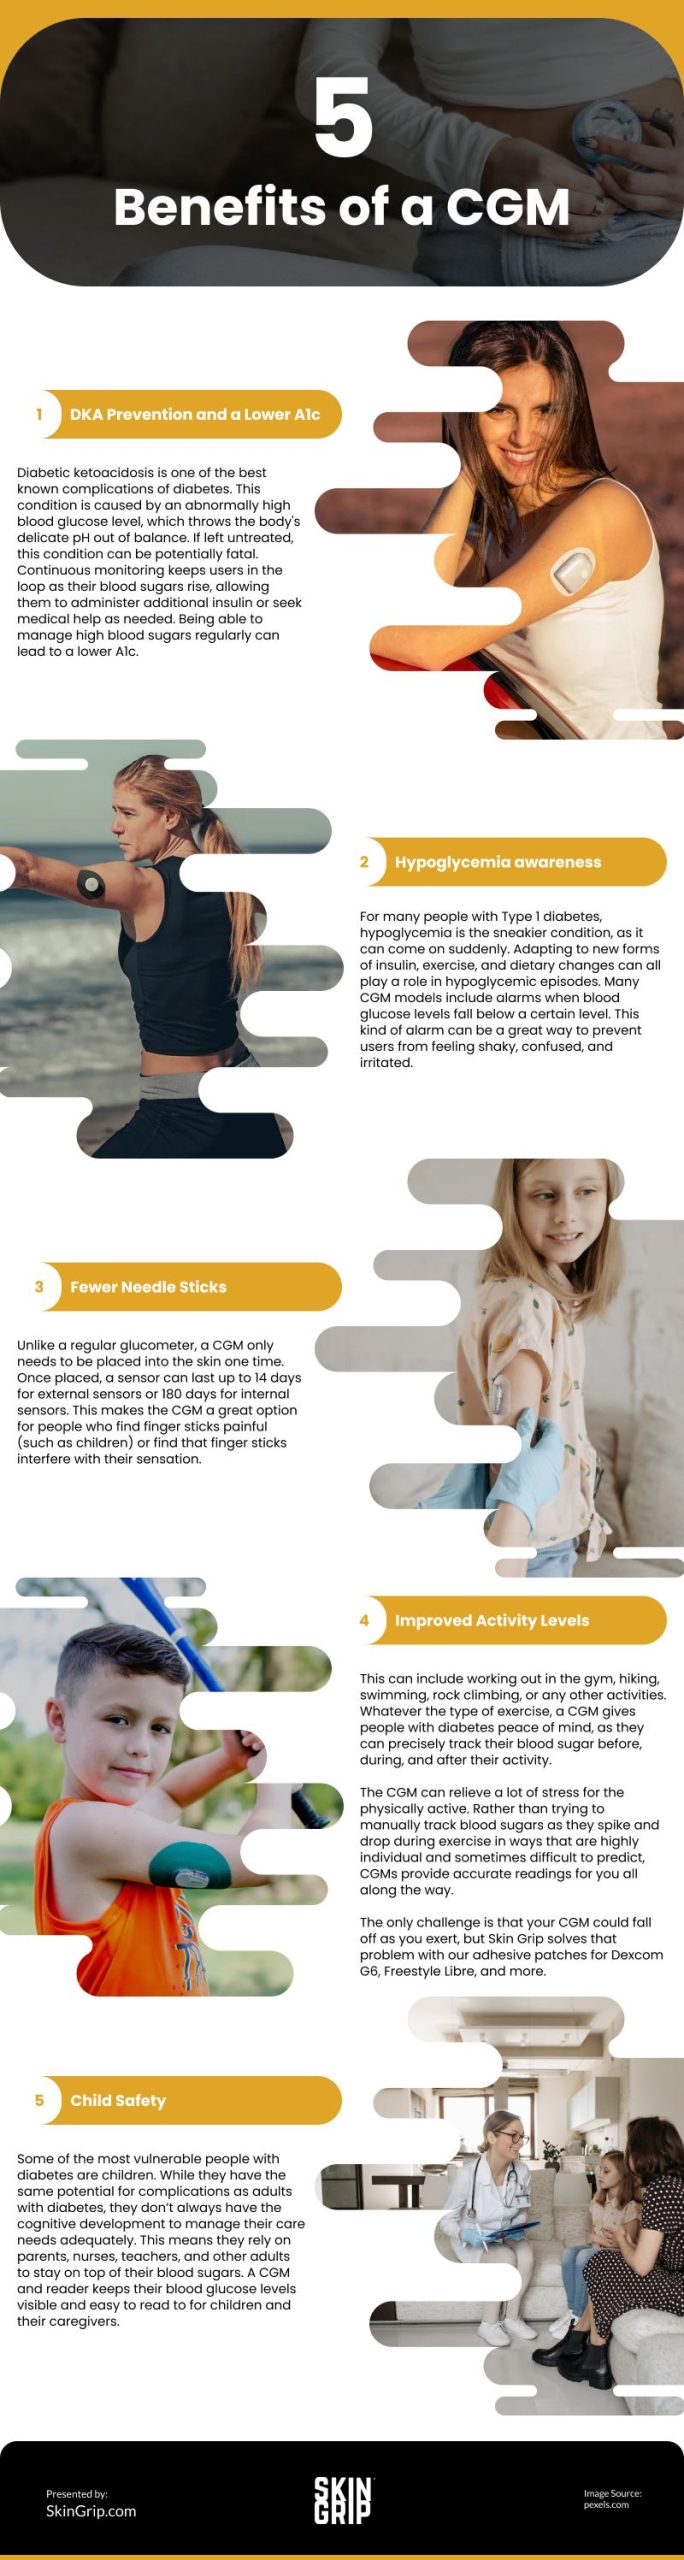 5 Benefits of a CGM Infographic